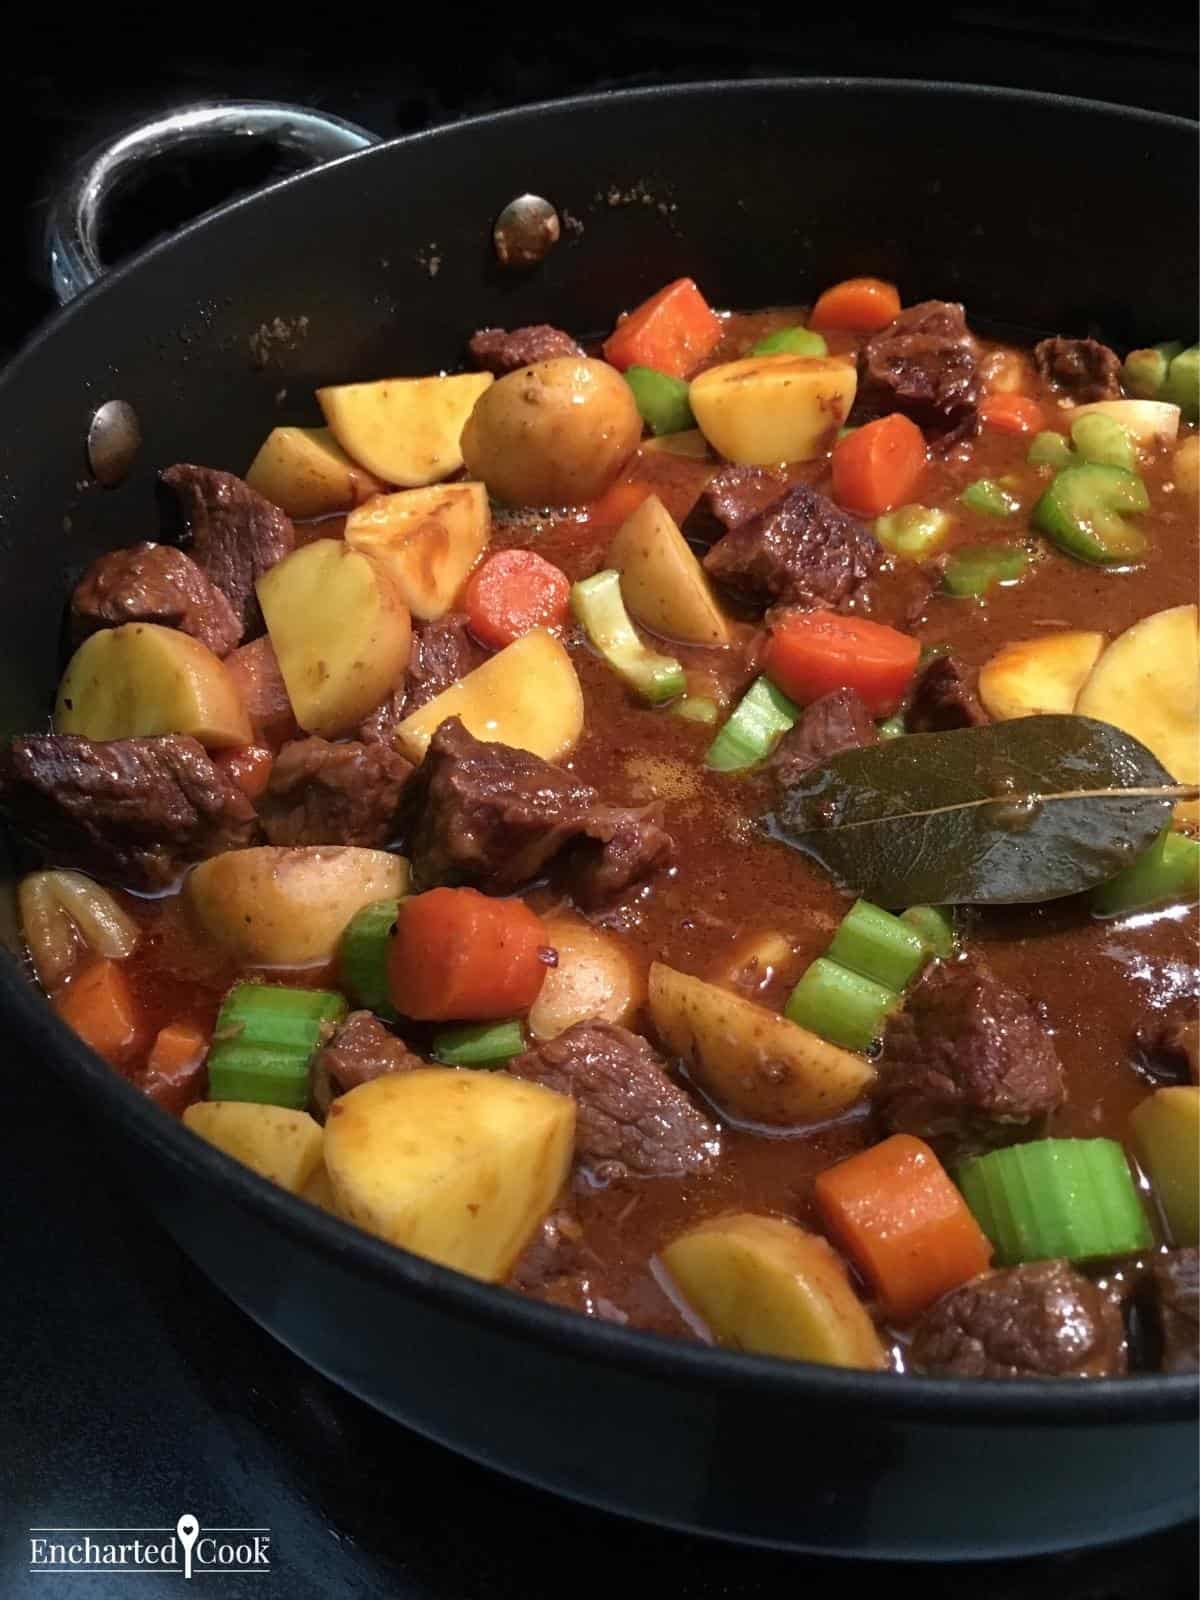 Beef, potatoes, carrots, and celery in a rich brown gravy with a bay leaf in a large pan.